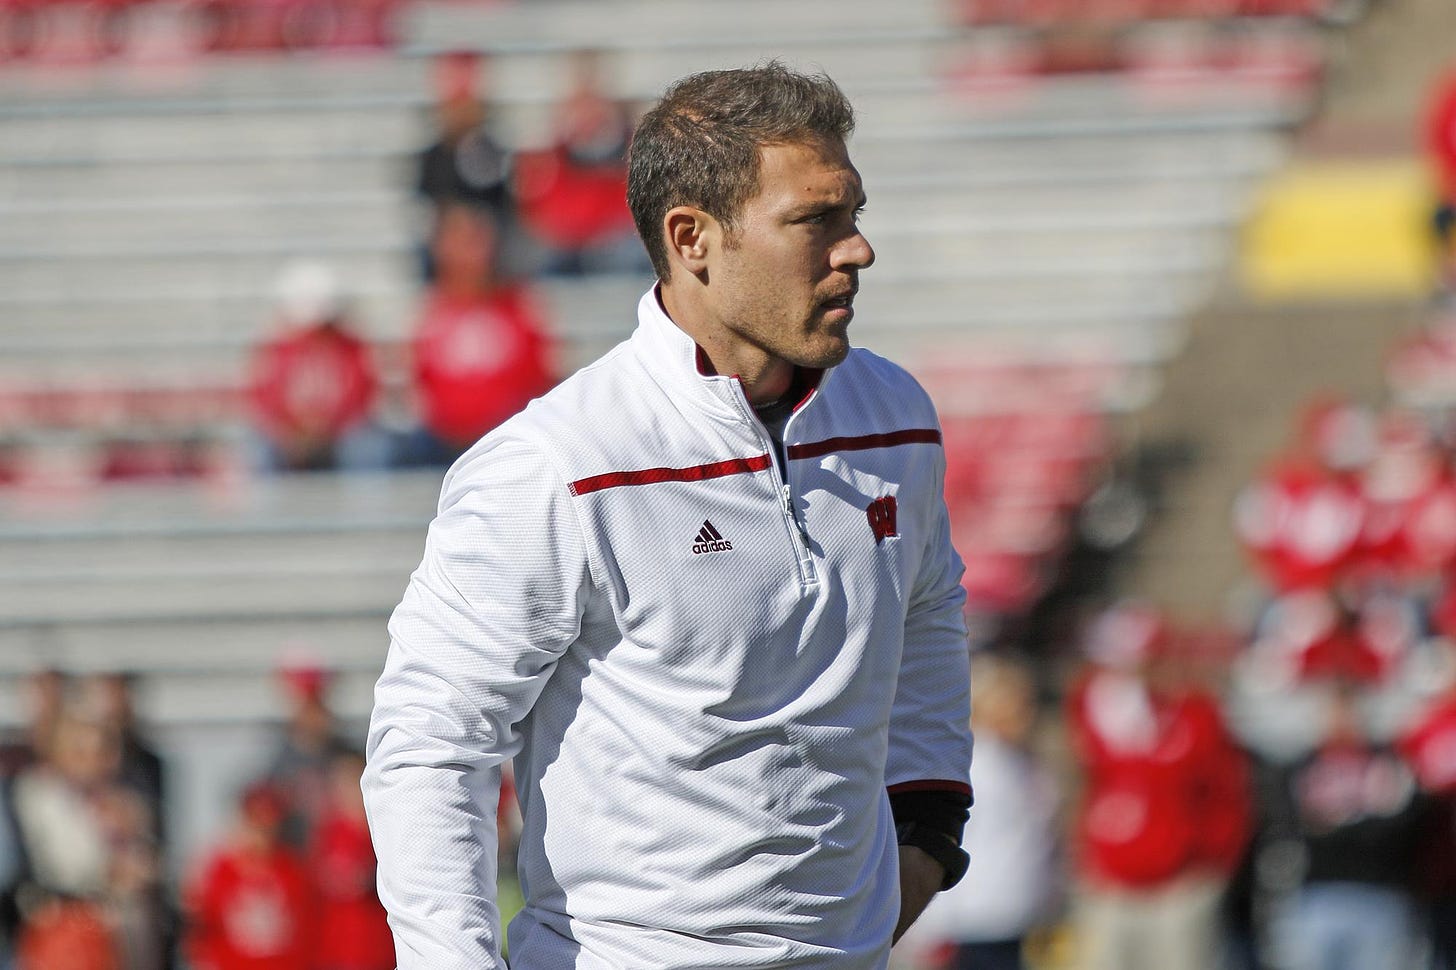 Mehlhaff knows importance of mental edge for kickers | Wisconsin Badgers